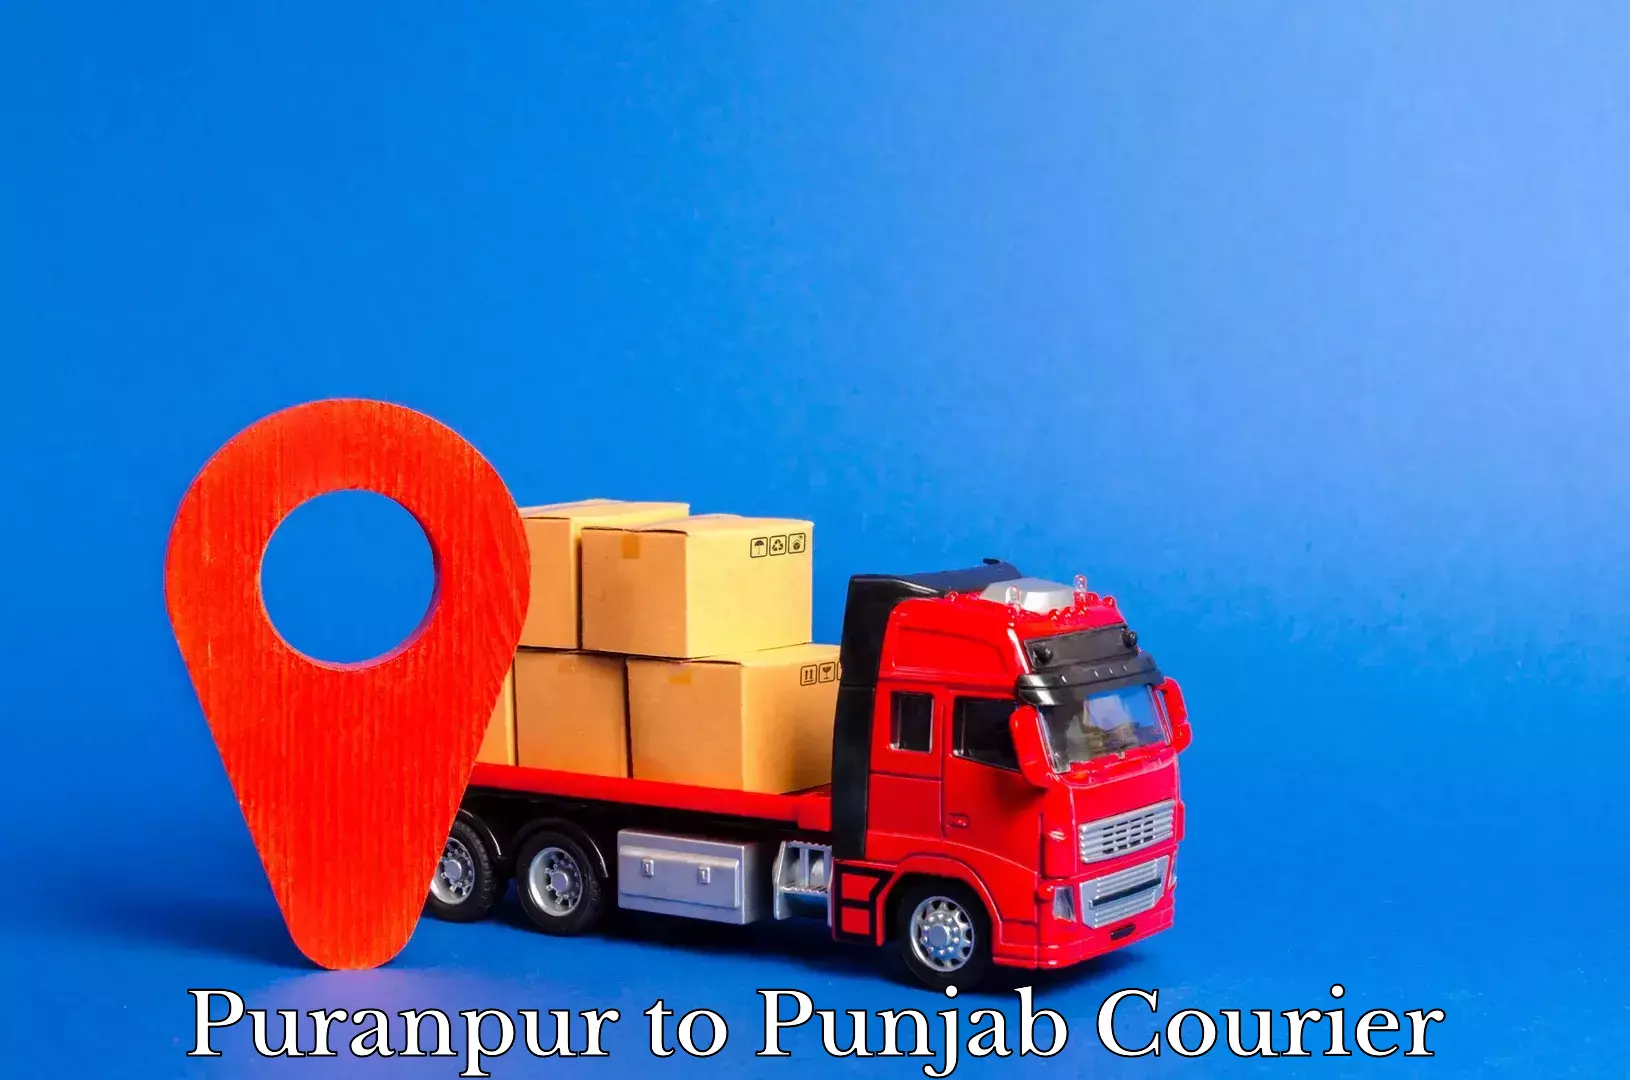 Efficient freight service Puranpur to Punjab